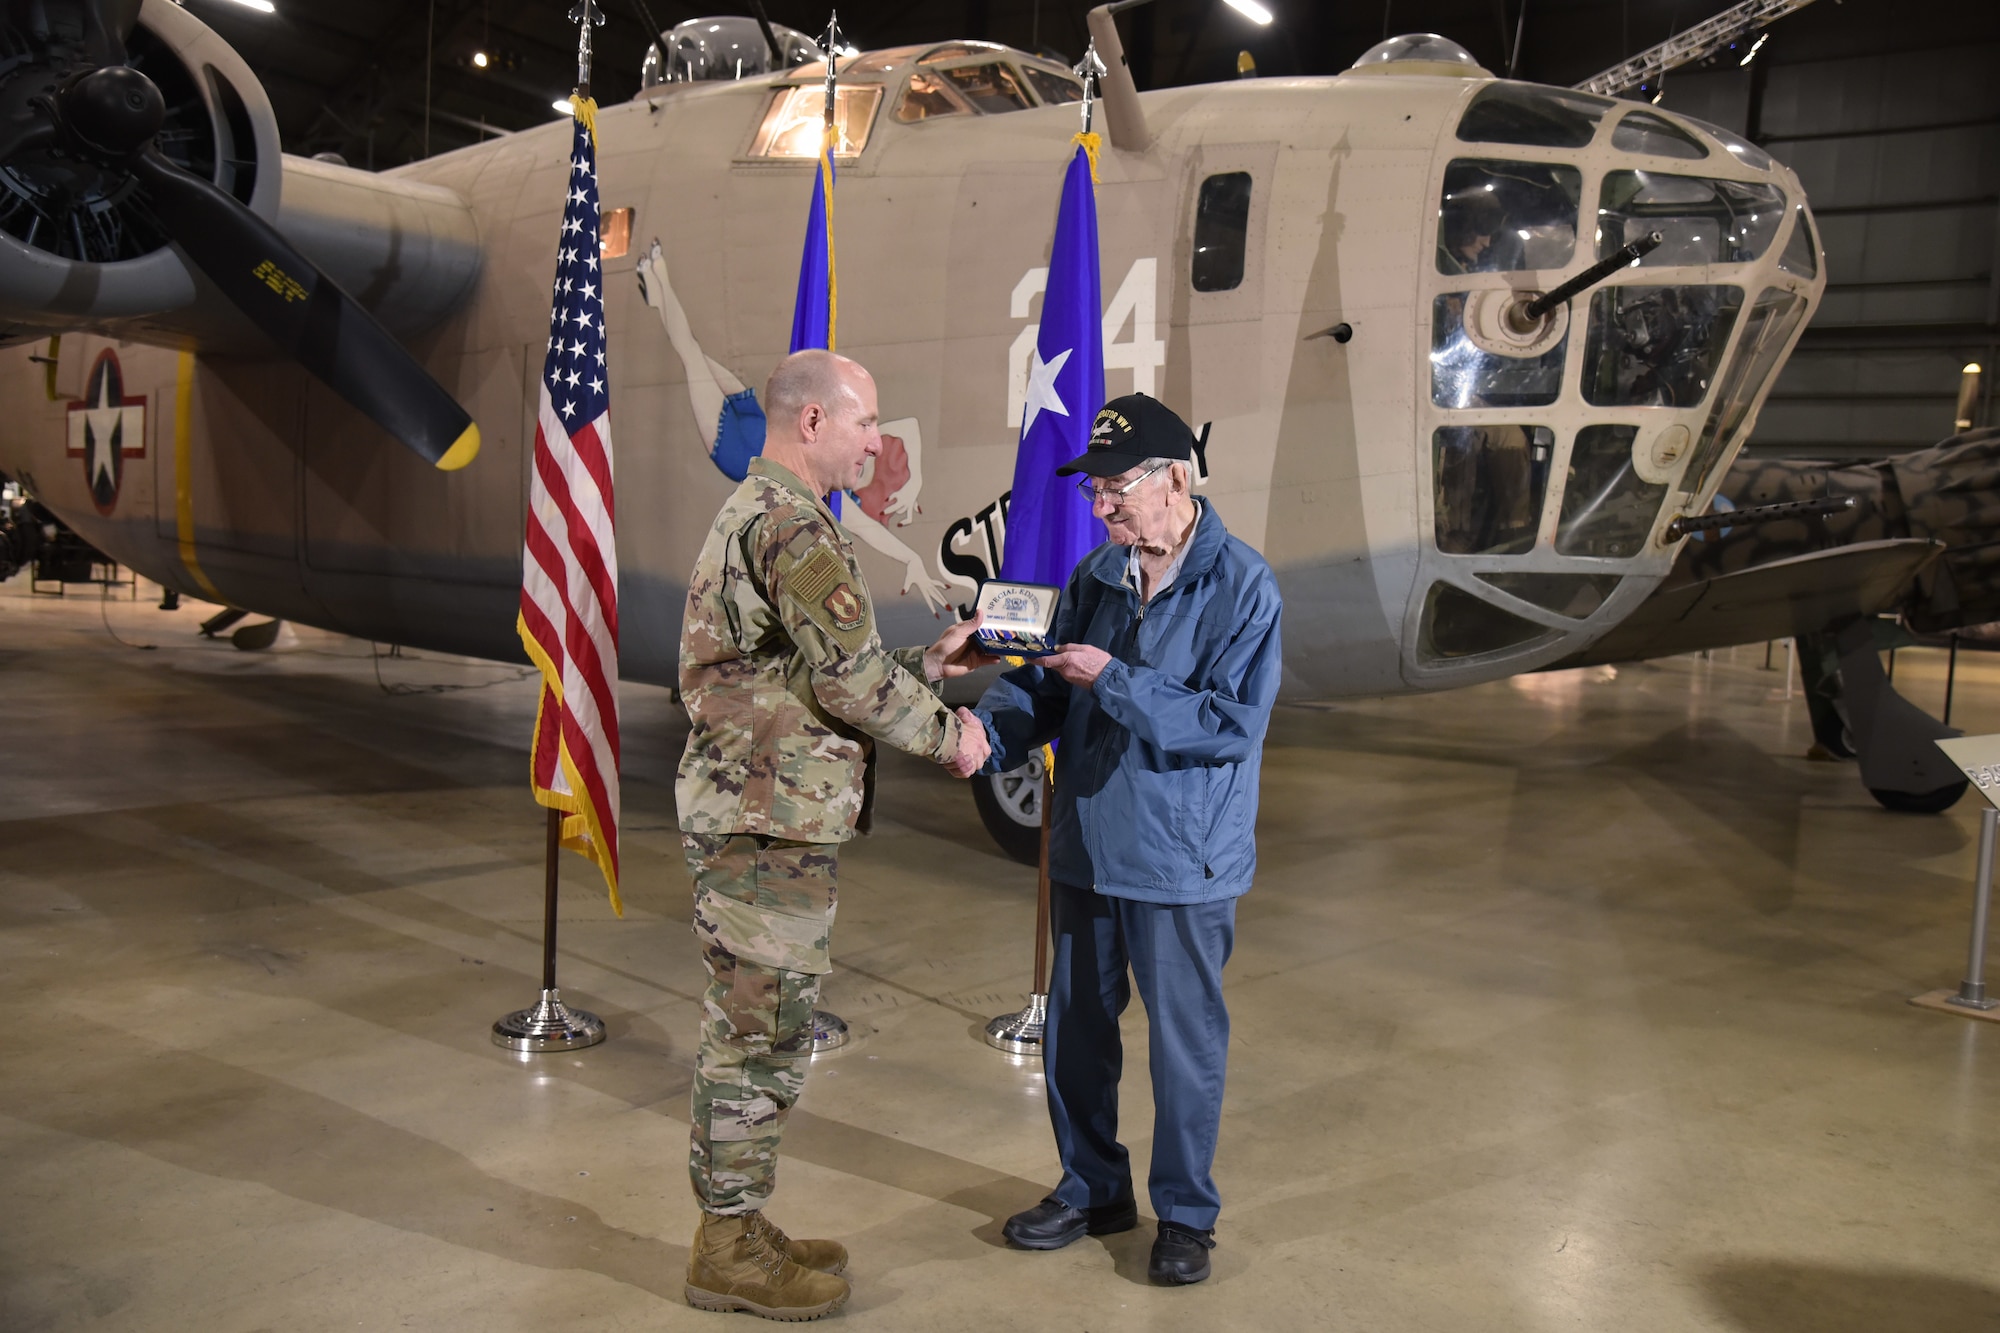 Maj. Gen. Carl Schaefer, Air Force Materiel Command deputy commander, presents service medals to 93-year-old World War II veteran 1st Lt. Joseph Kollenberg at the National Museum of the United States Air Force, July 24. Schaefer presented Kollenberg with the  Distinguished Flying Cross, the Air Medal with three Oak Leaf Clusters, and the European, African, and Middle Eastern campaign service medals to replace those misplaced in the 70 years since the veteran left active duty service. (Air Force photo/Ken LaRock)